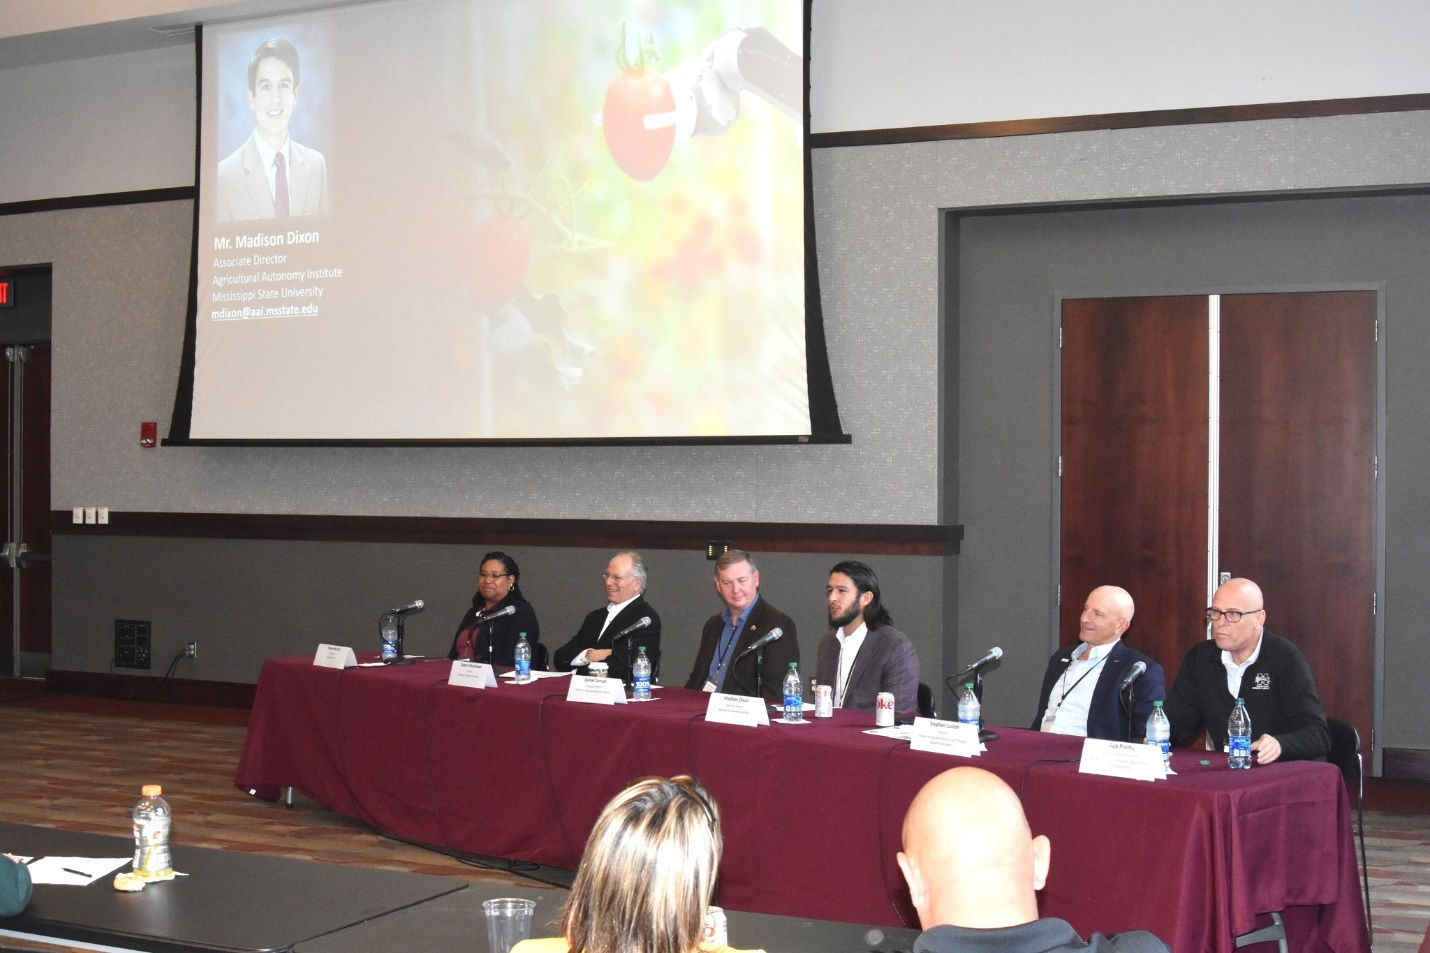 CAVS-Extension Director, Tonya McCall (far left) serves on panel representing MSU research center and institutes at the ORED Autonomous Systems Symposium